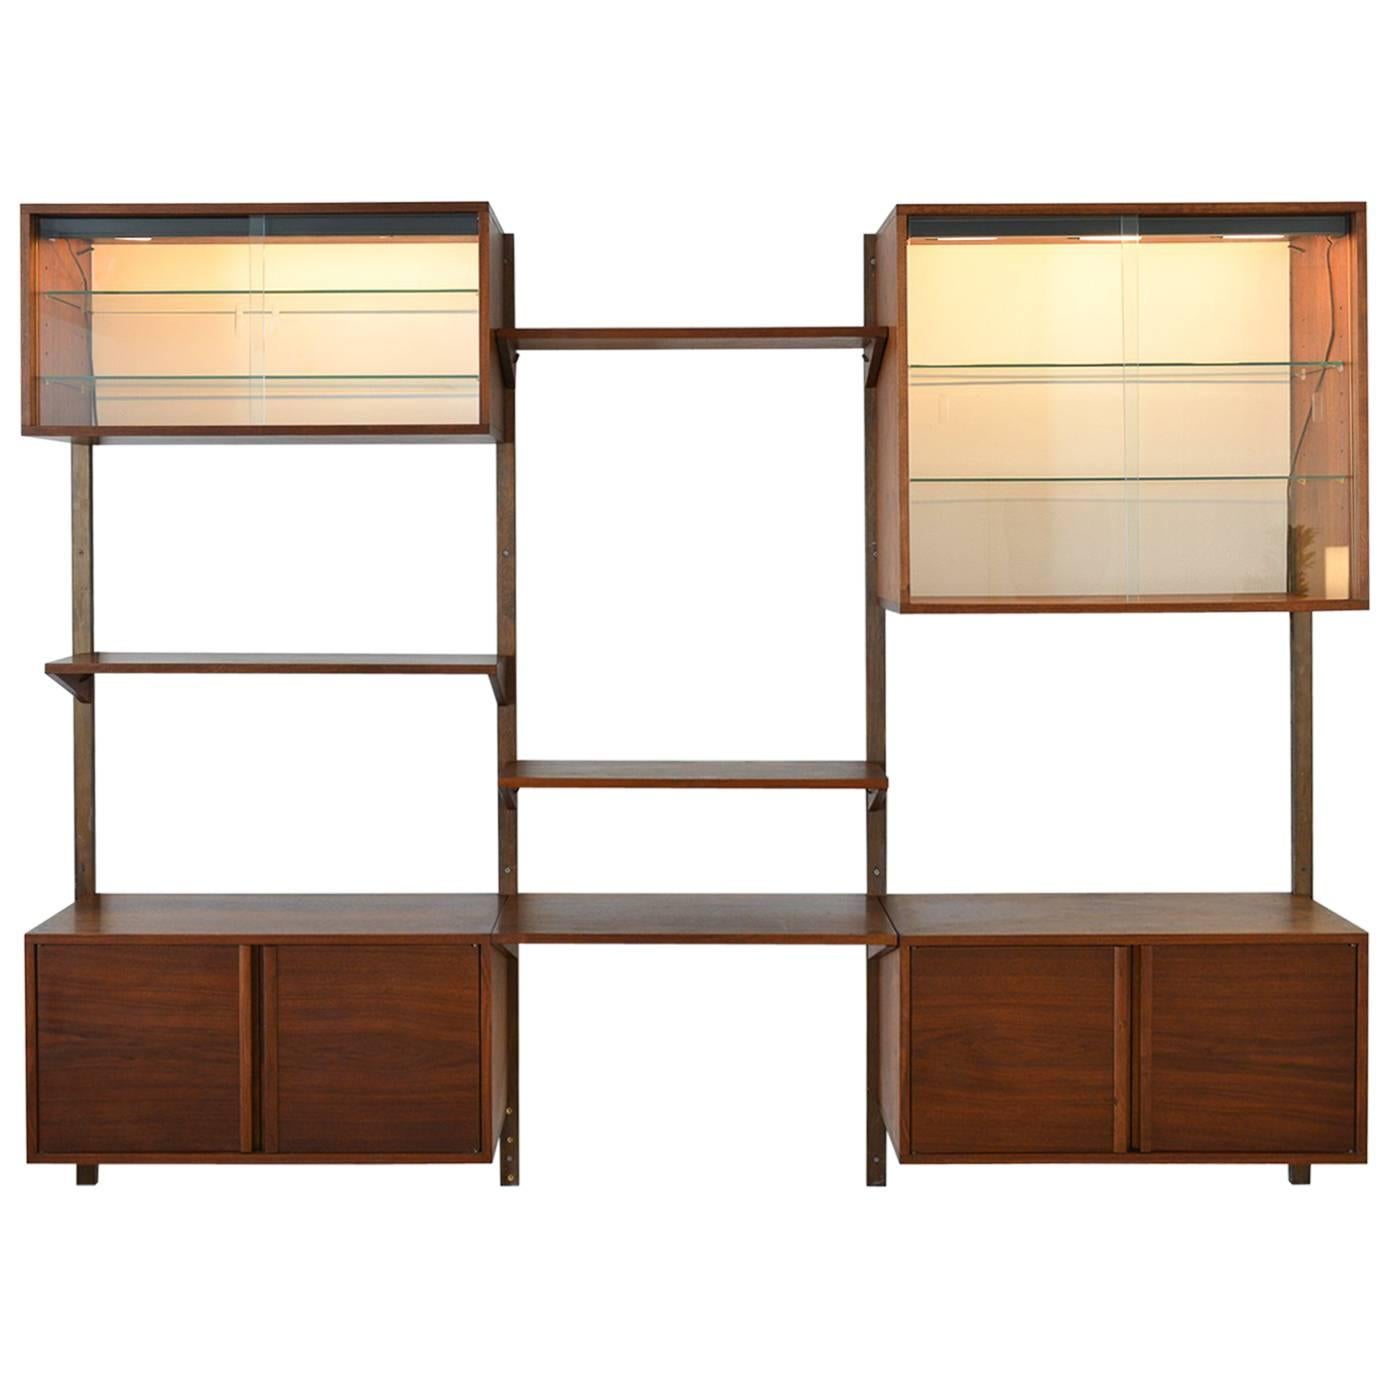 Walnut 3 Bay Wall Unit with Lighted Cabinets, circa 1970